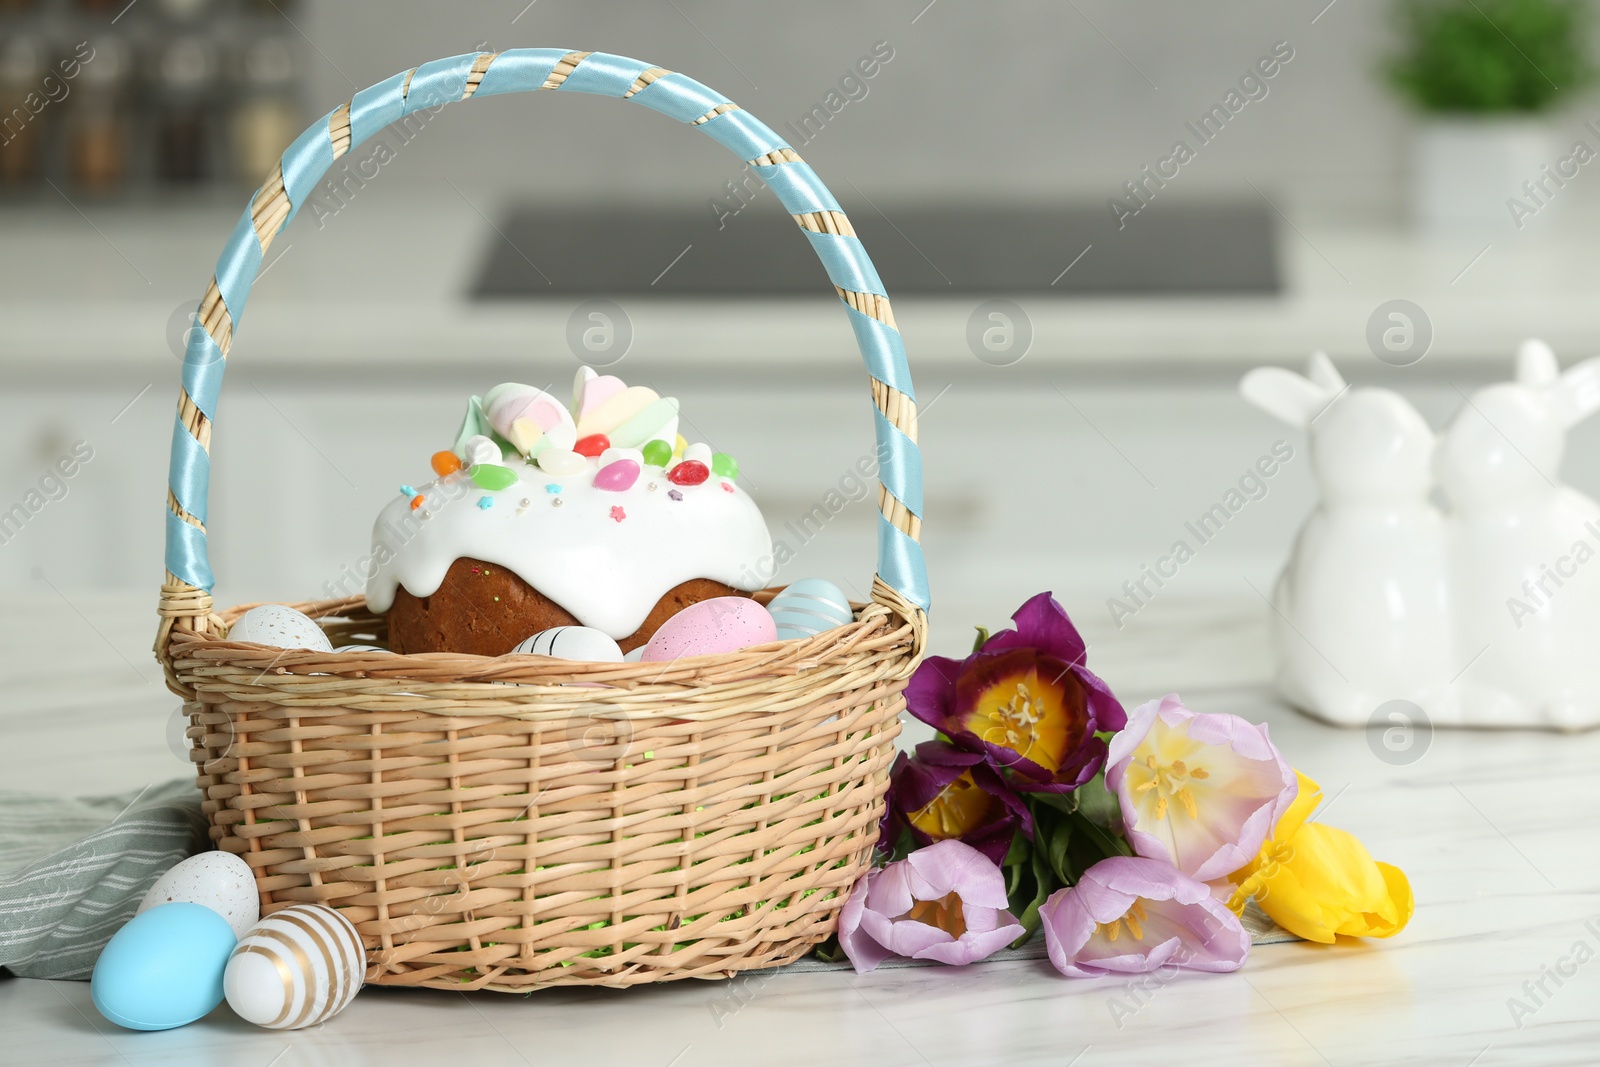 Photo of Easter basket with painted eggs and tasty cake near flowers on white marble table indoors